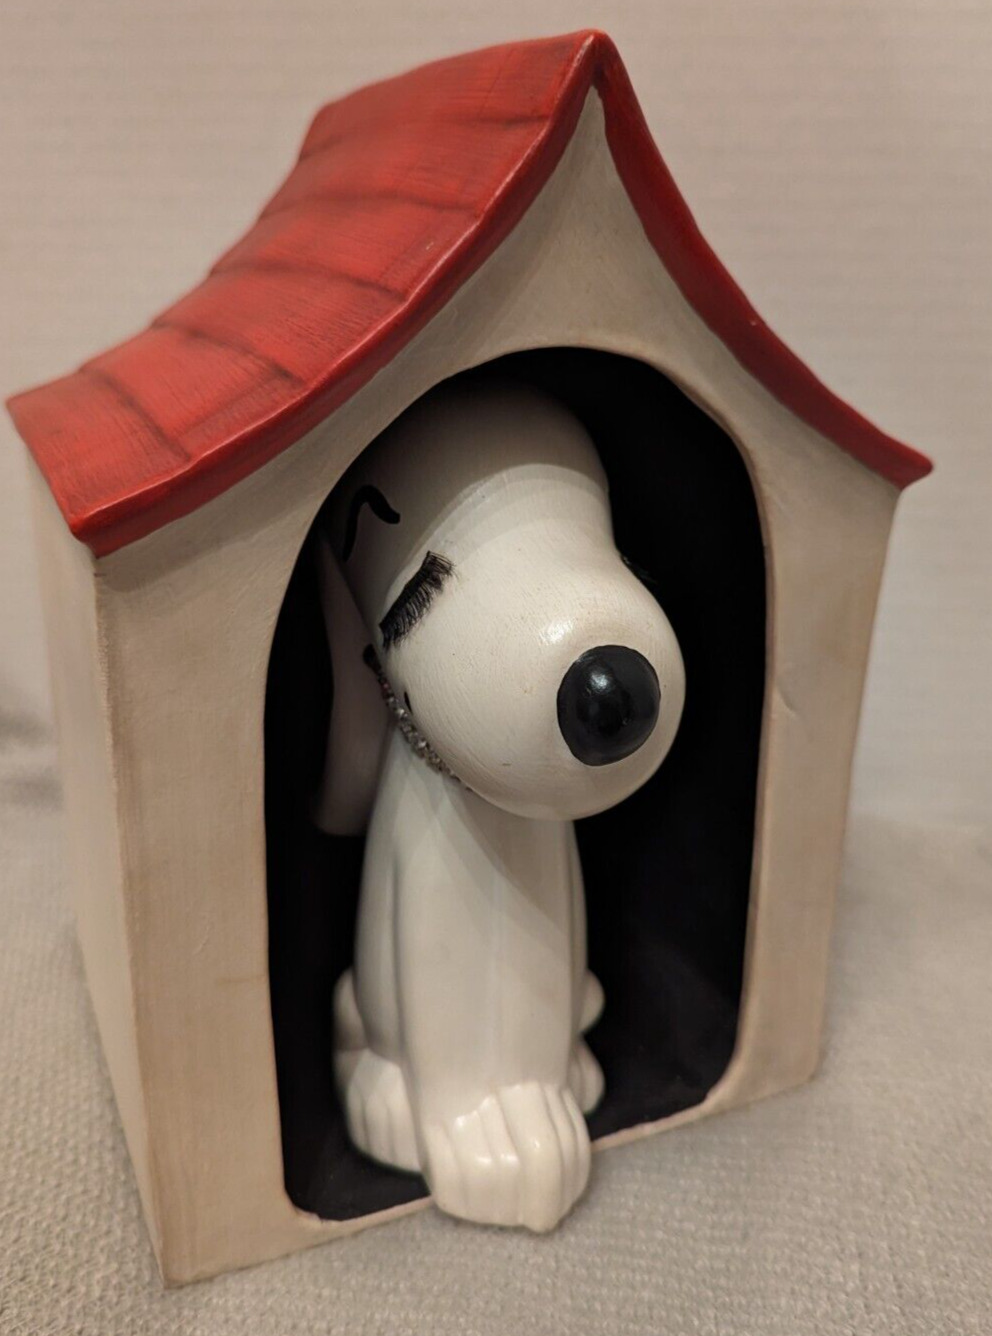 Peanuts Ceramic SNOOPY Dog Bank & House - Ceramic Statue Figure Hand painted